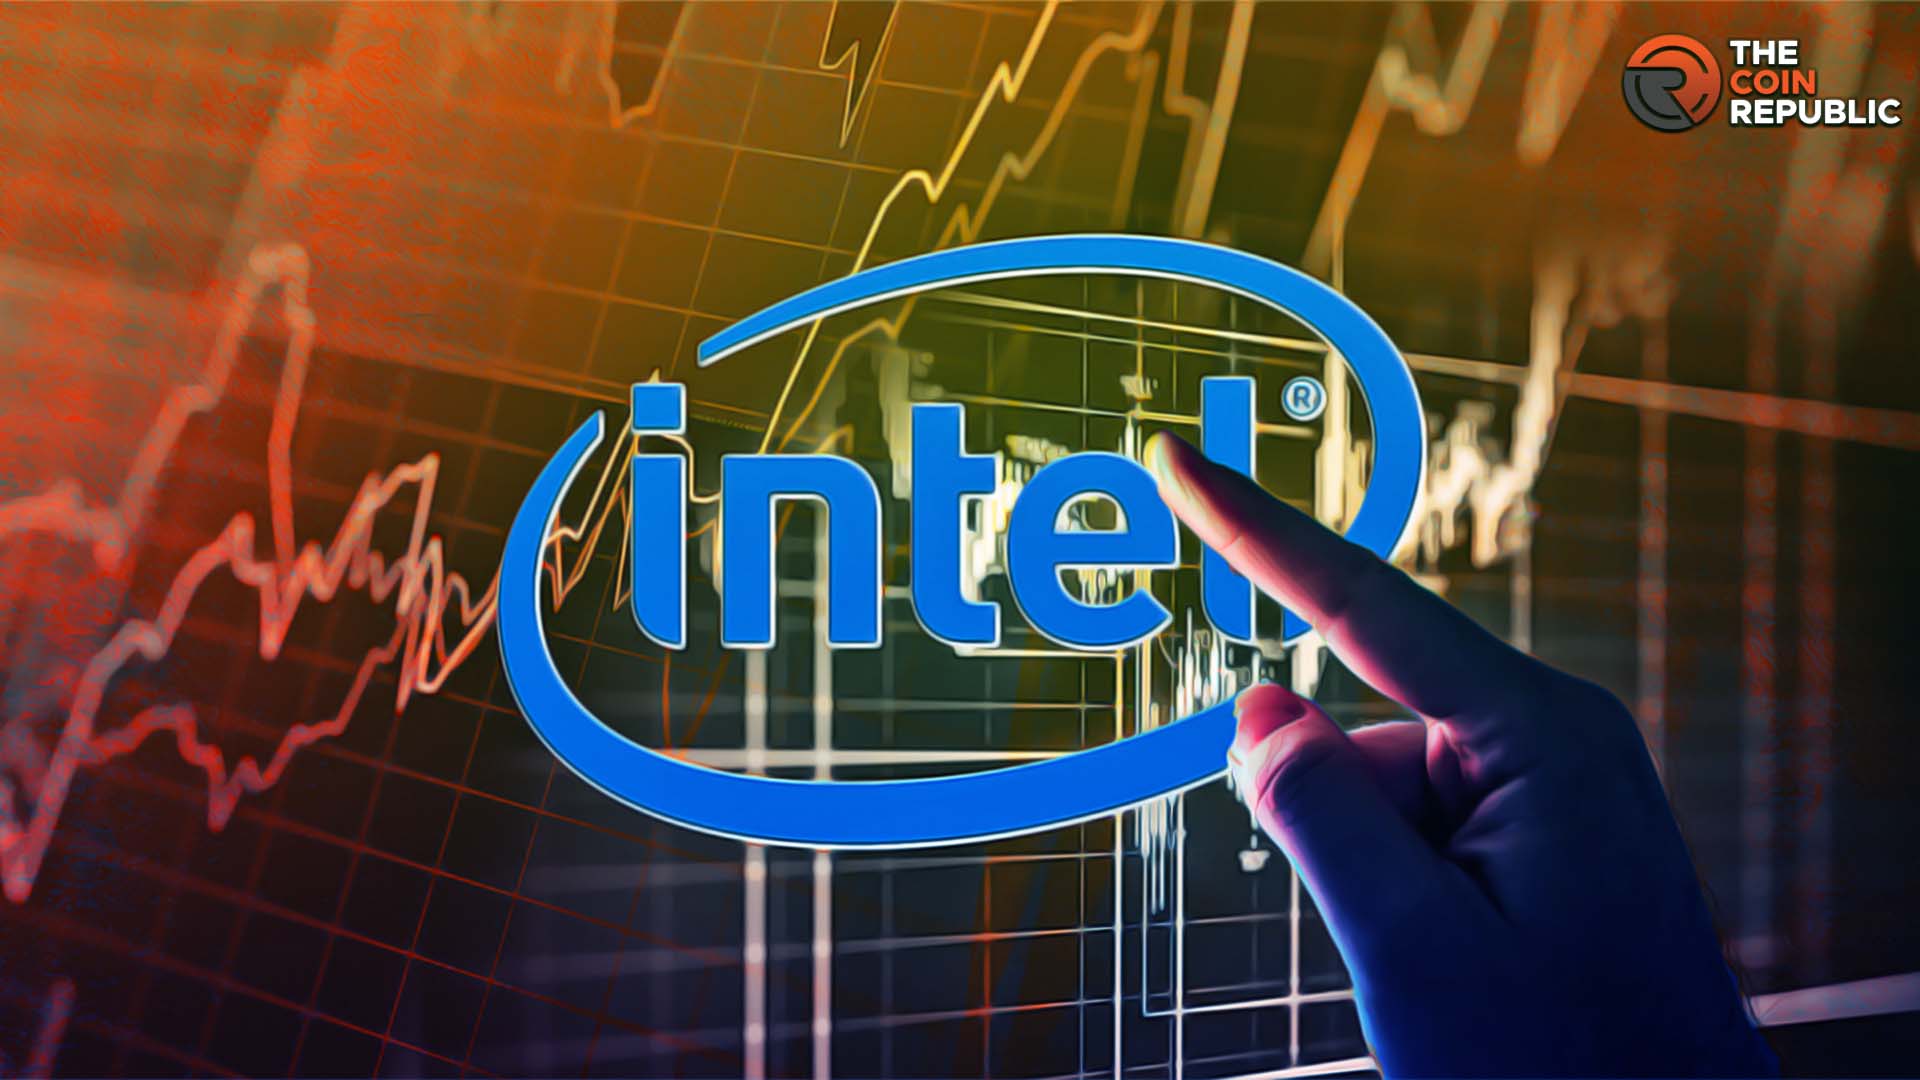 Intel Corp. (INTC Stock) – Going Back to Basics to Move Ahead